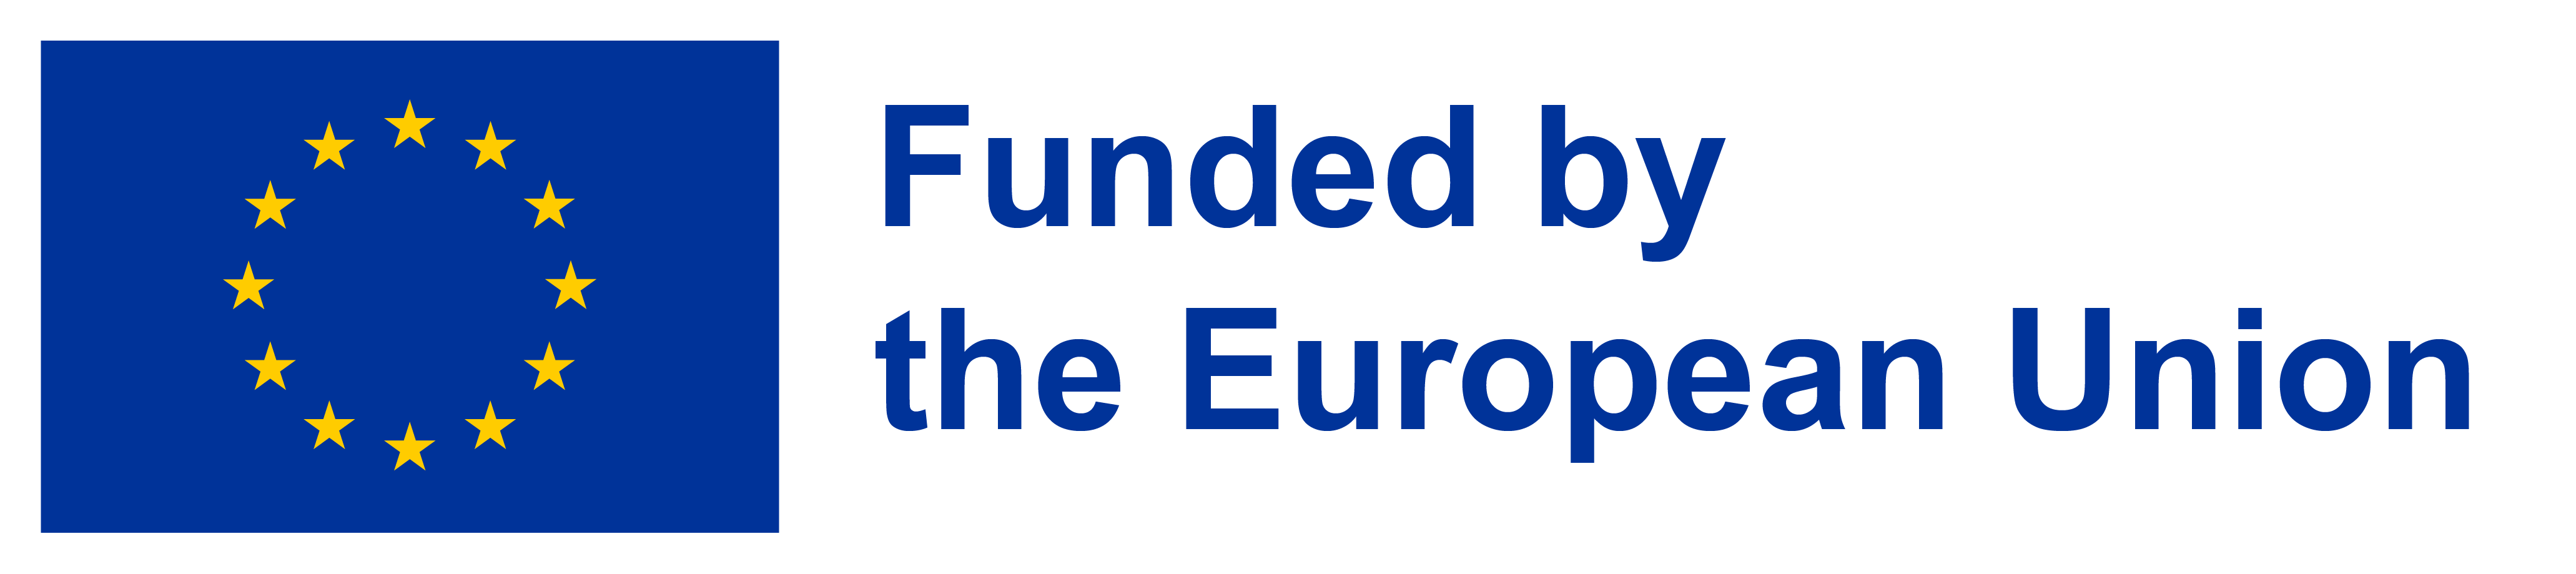 EU Flag and text: Funded by the European Union